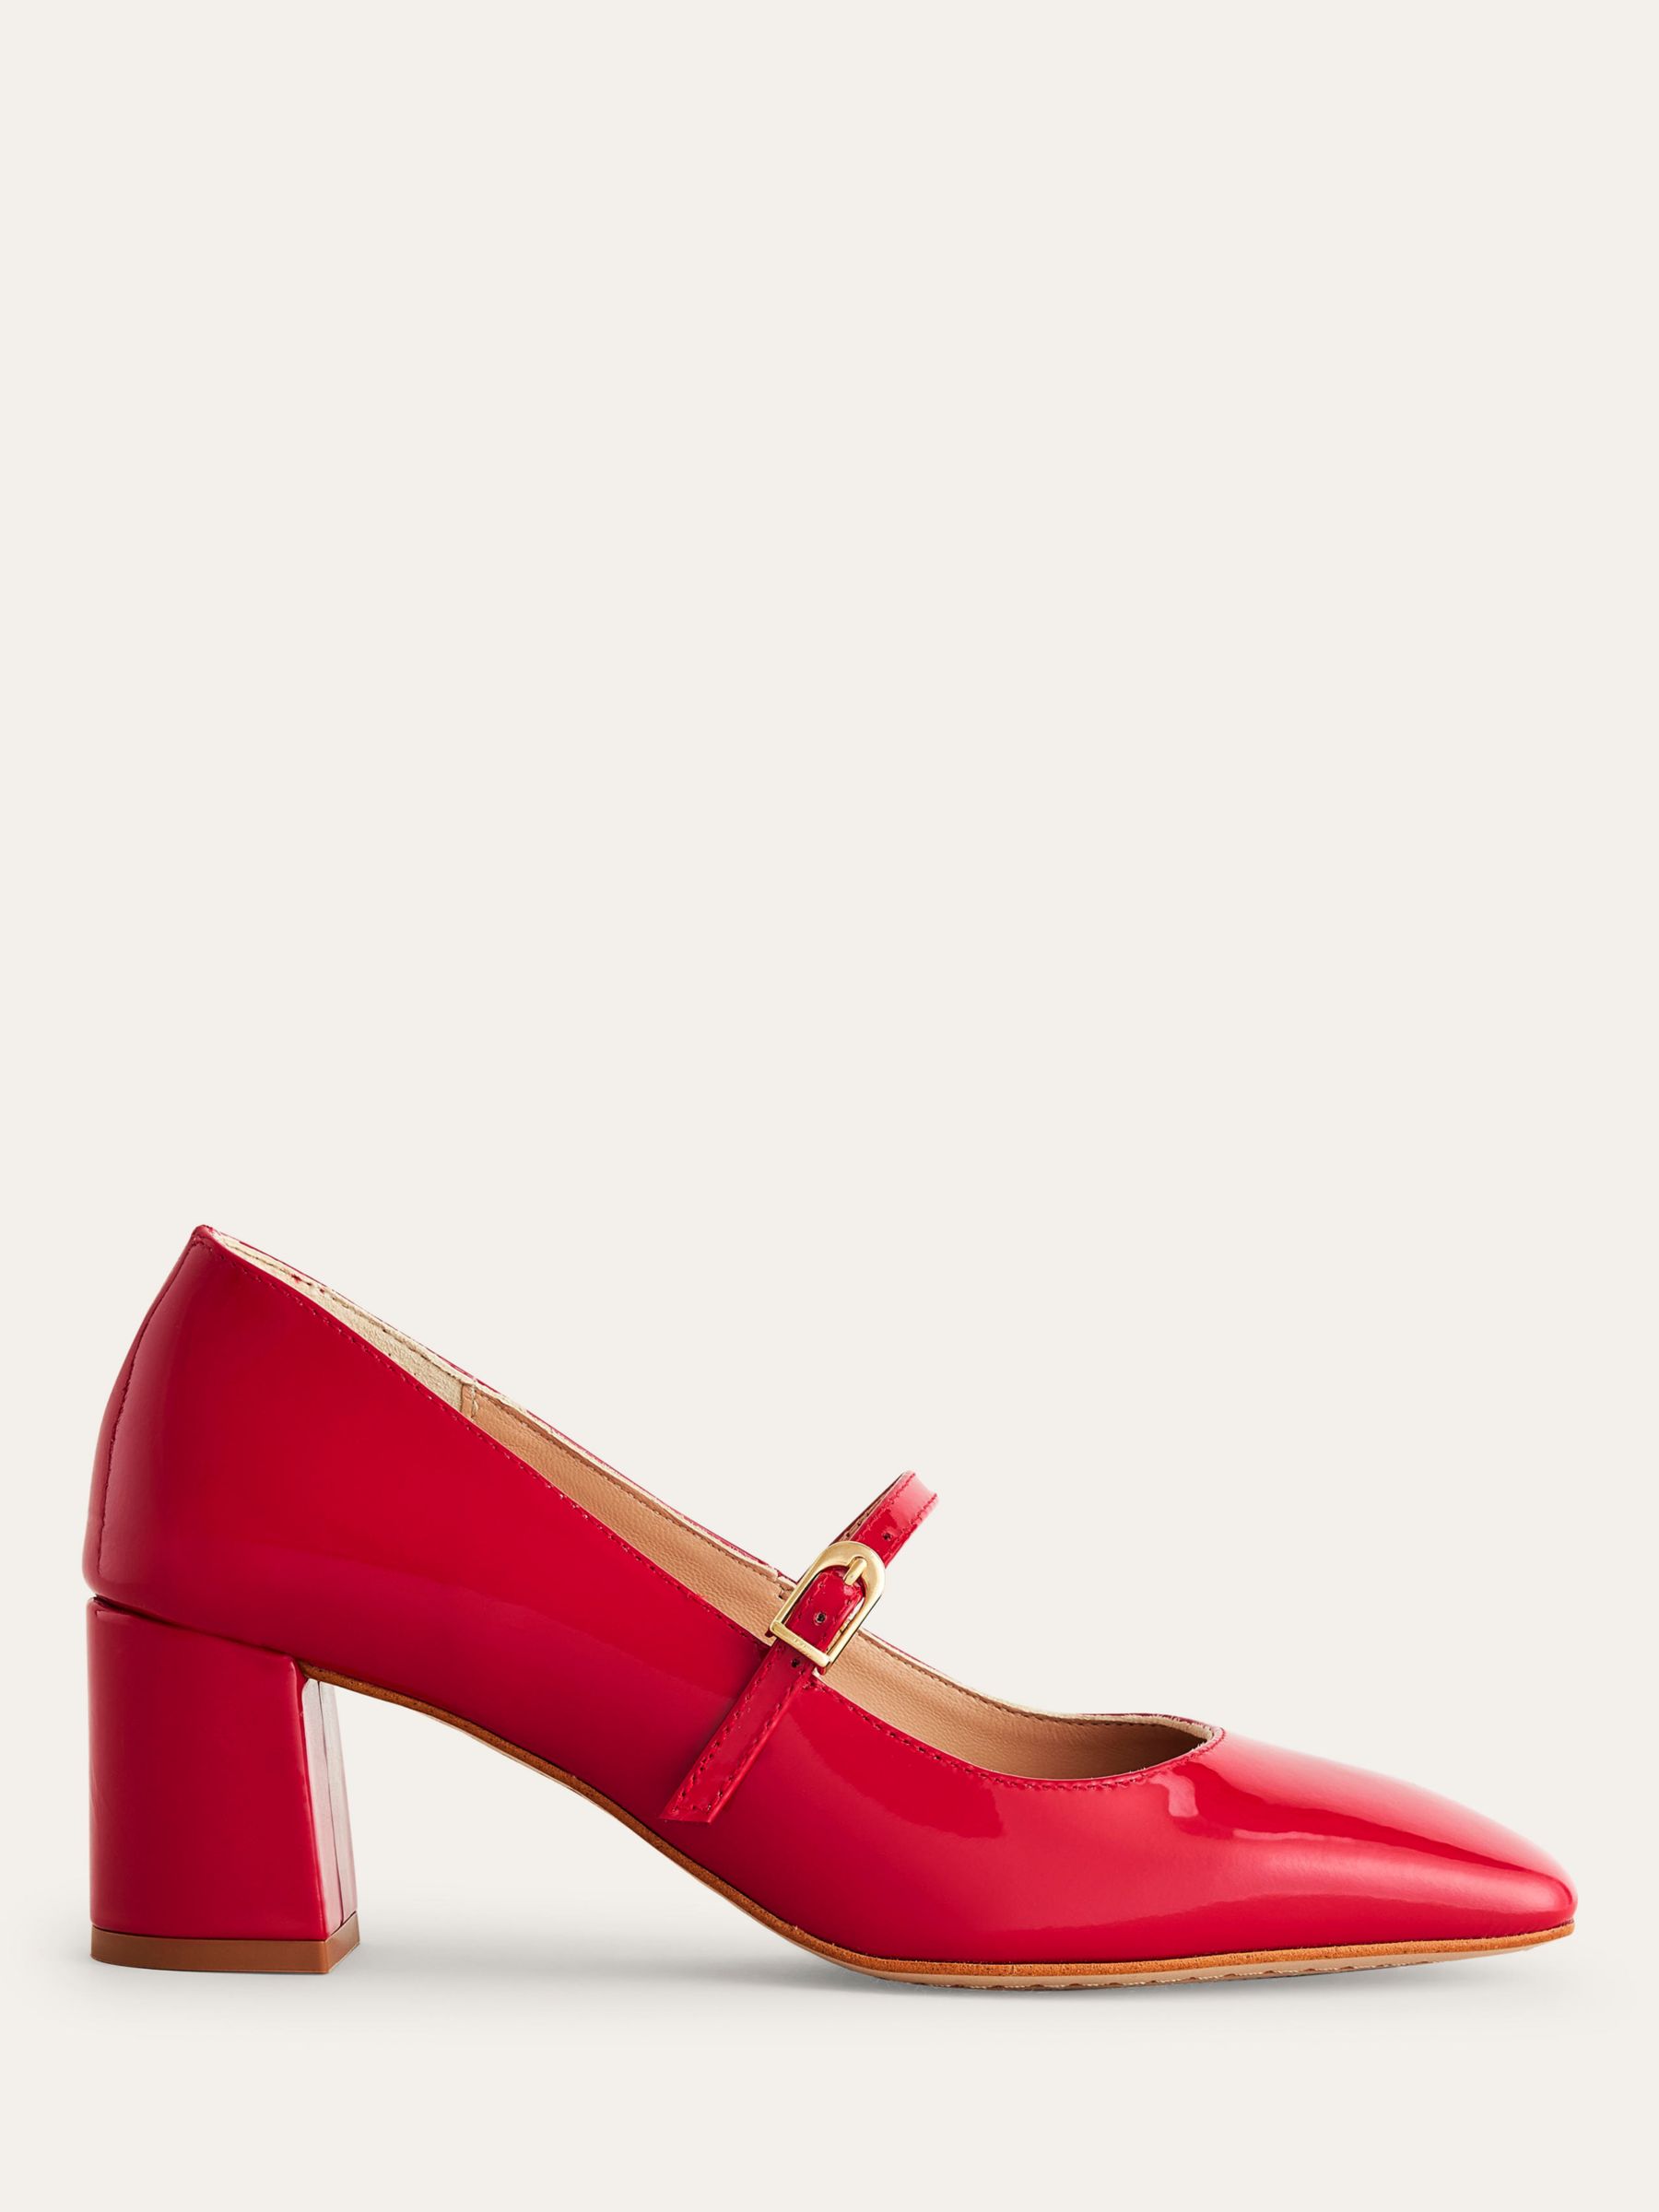 Boden Block Heel Mary Jane Shoes, Poppy Red Patent at John Lewis & Partners